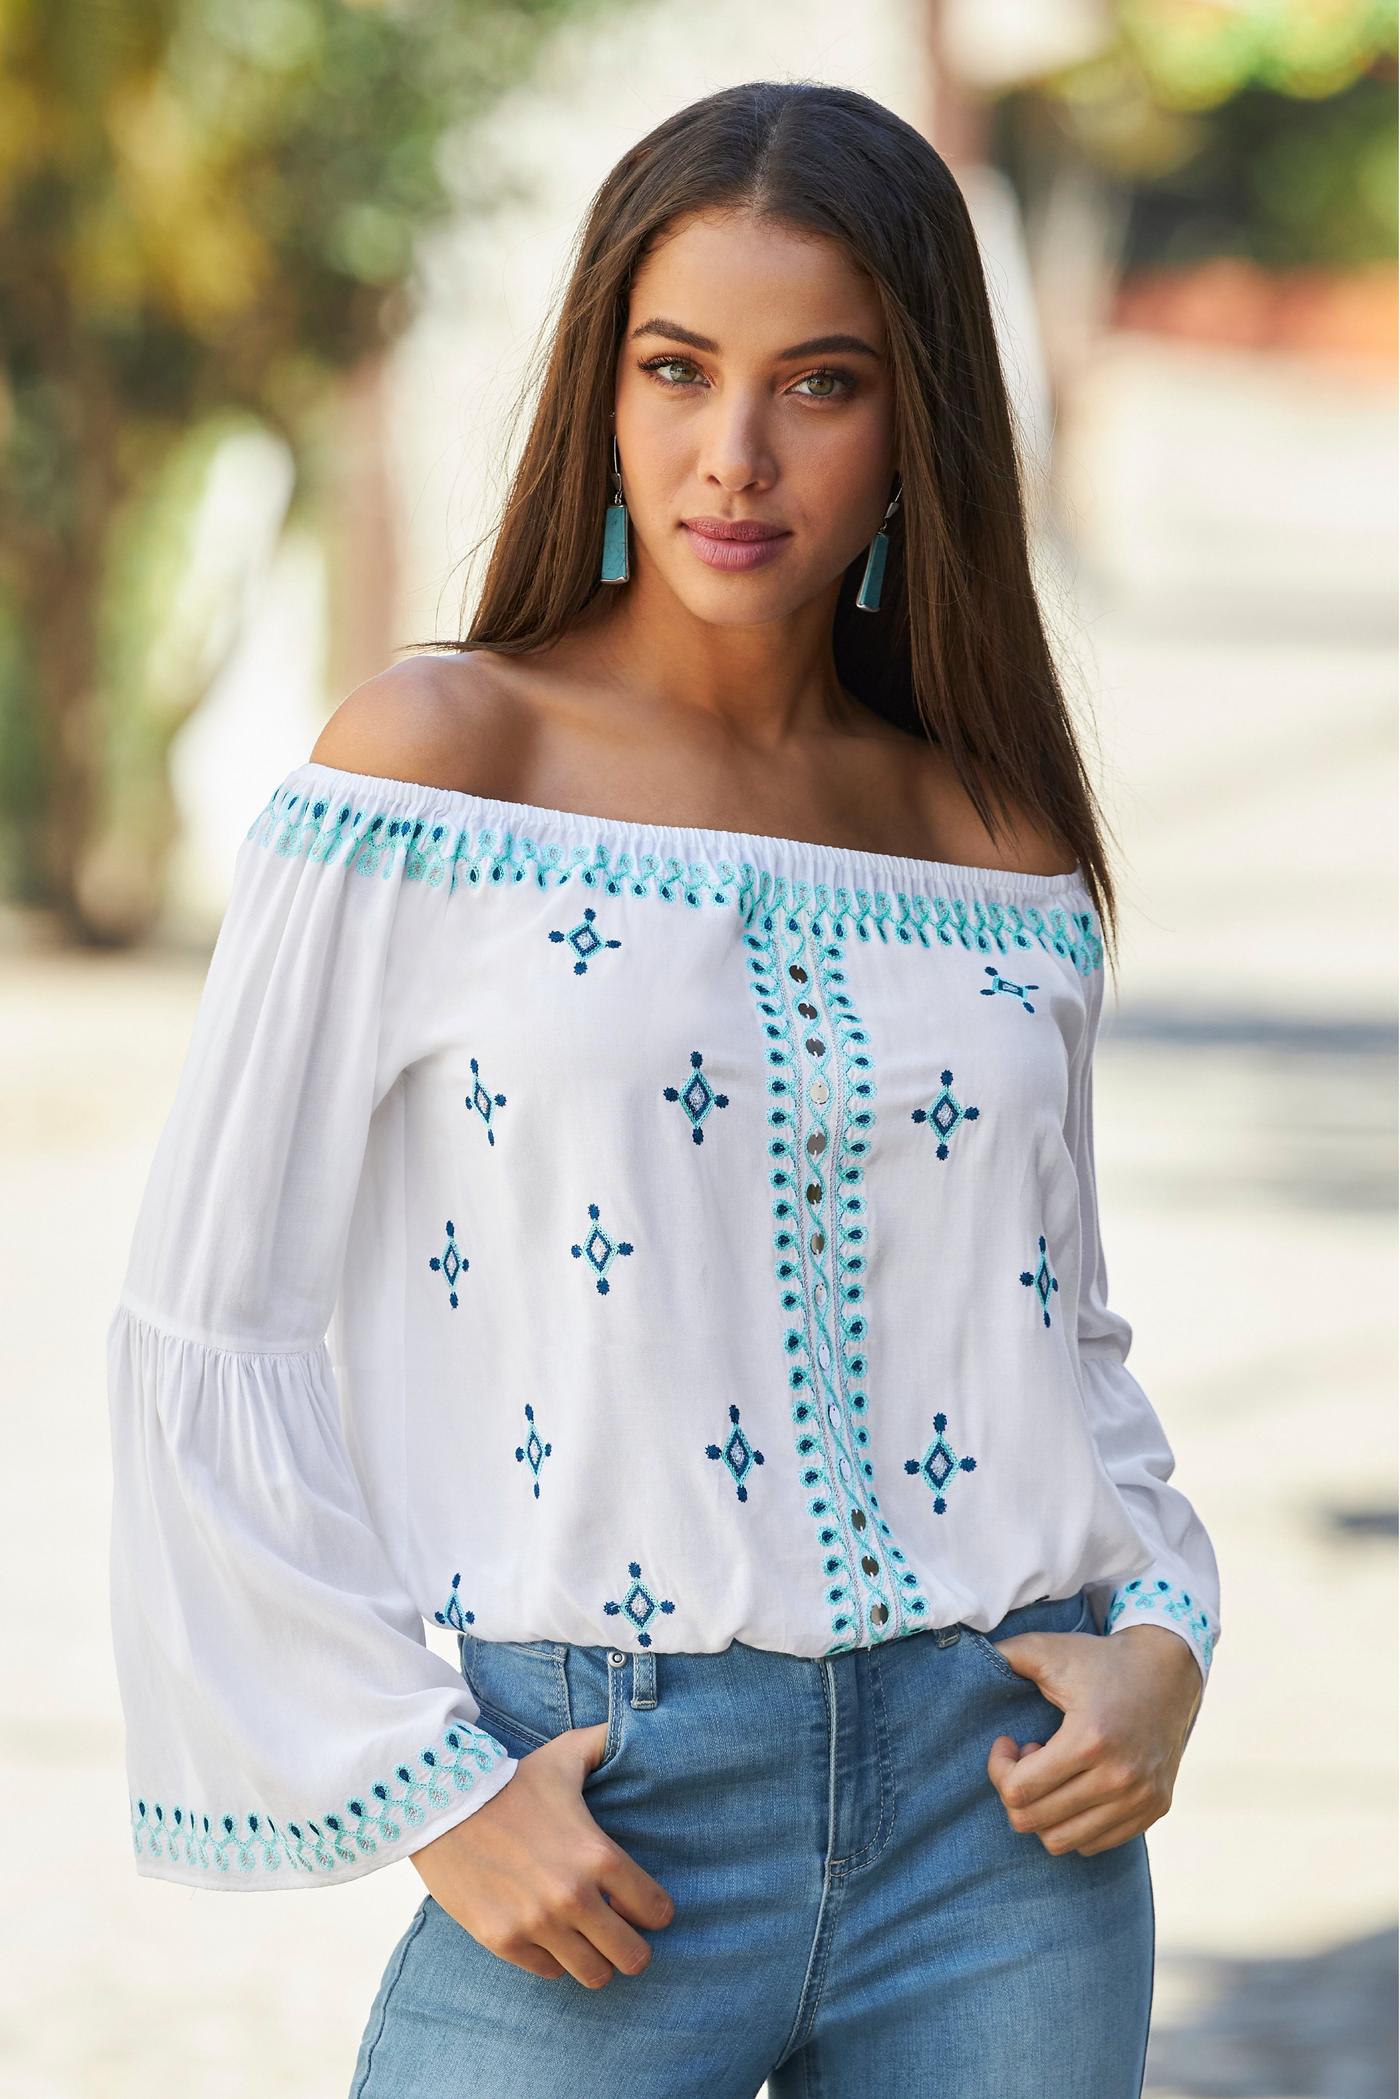 Mirror Embellished And Embroidered Off The Shoulder Top White